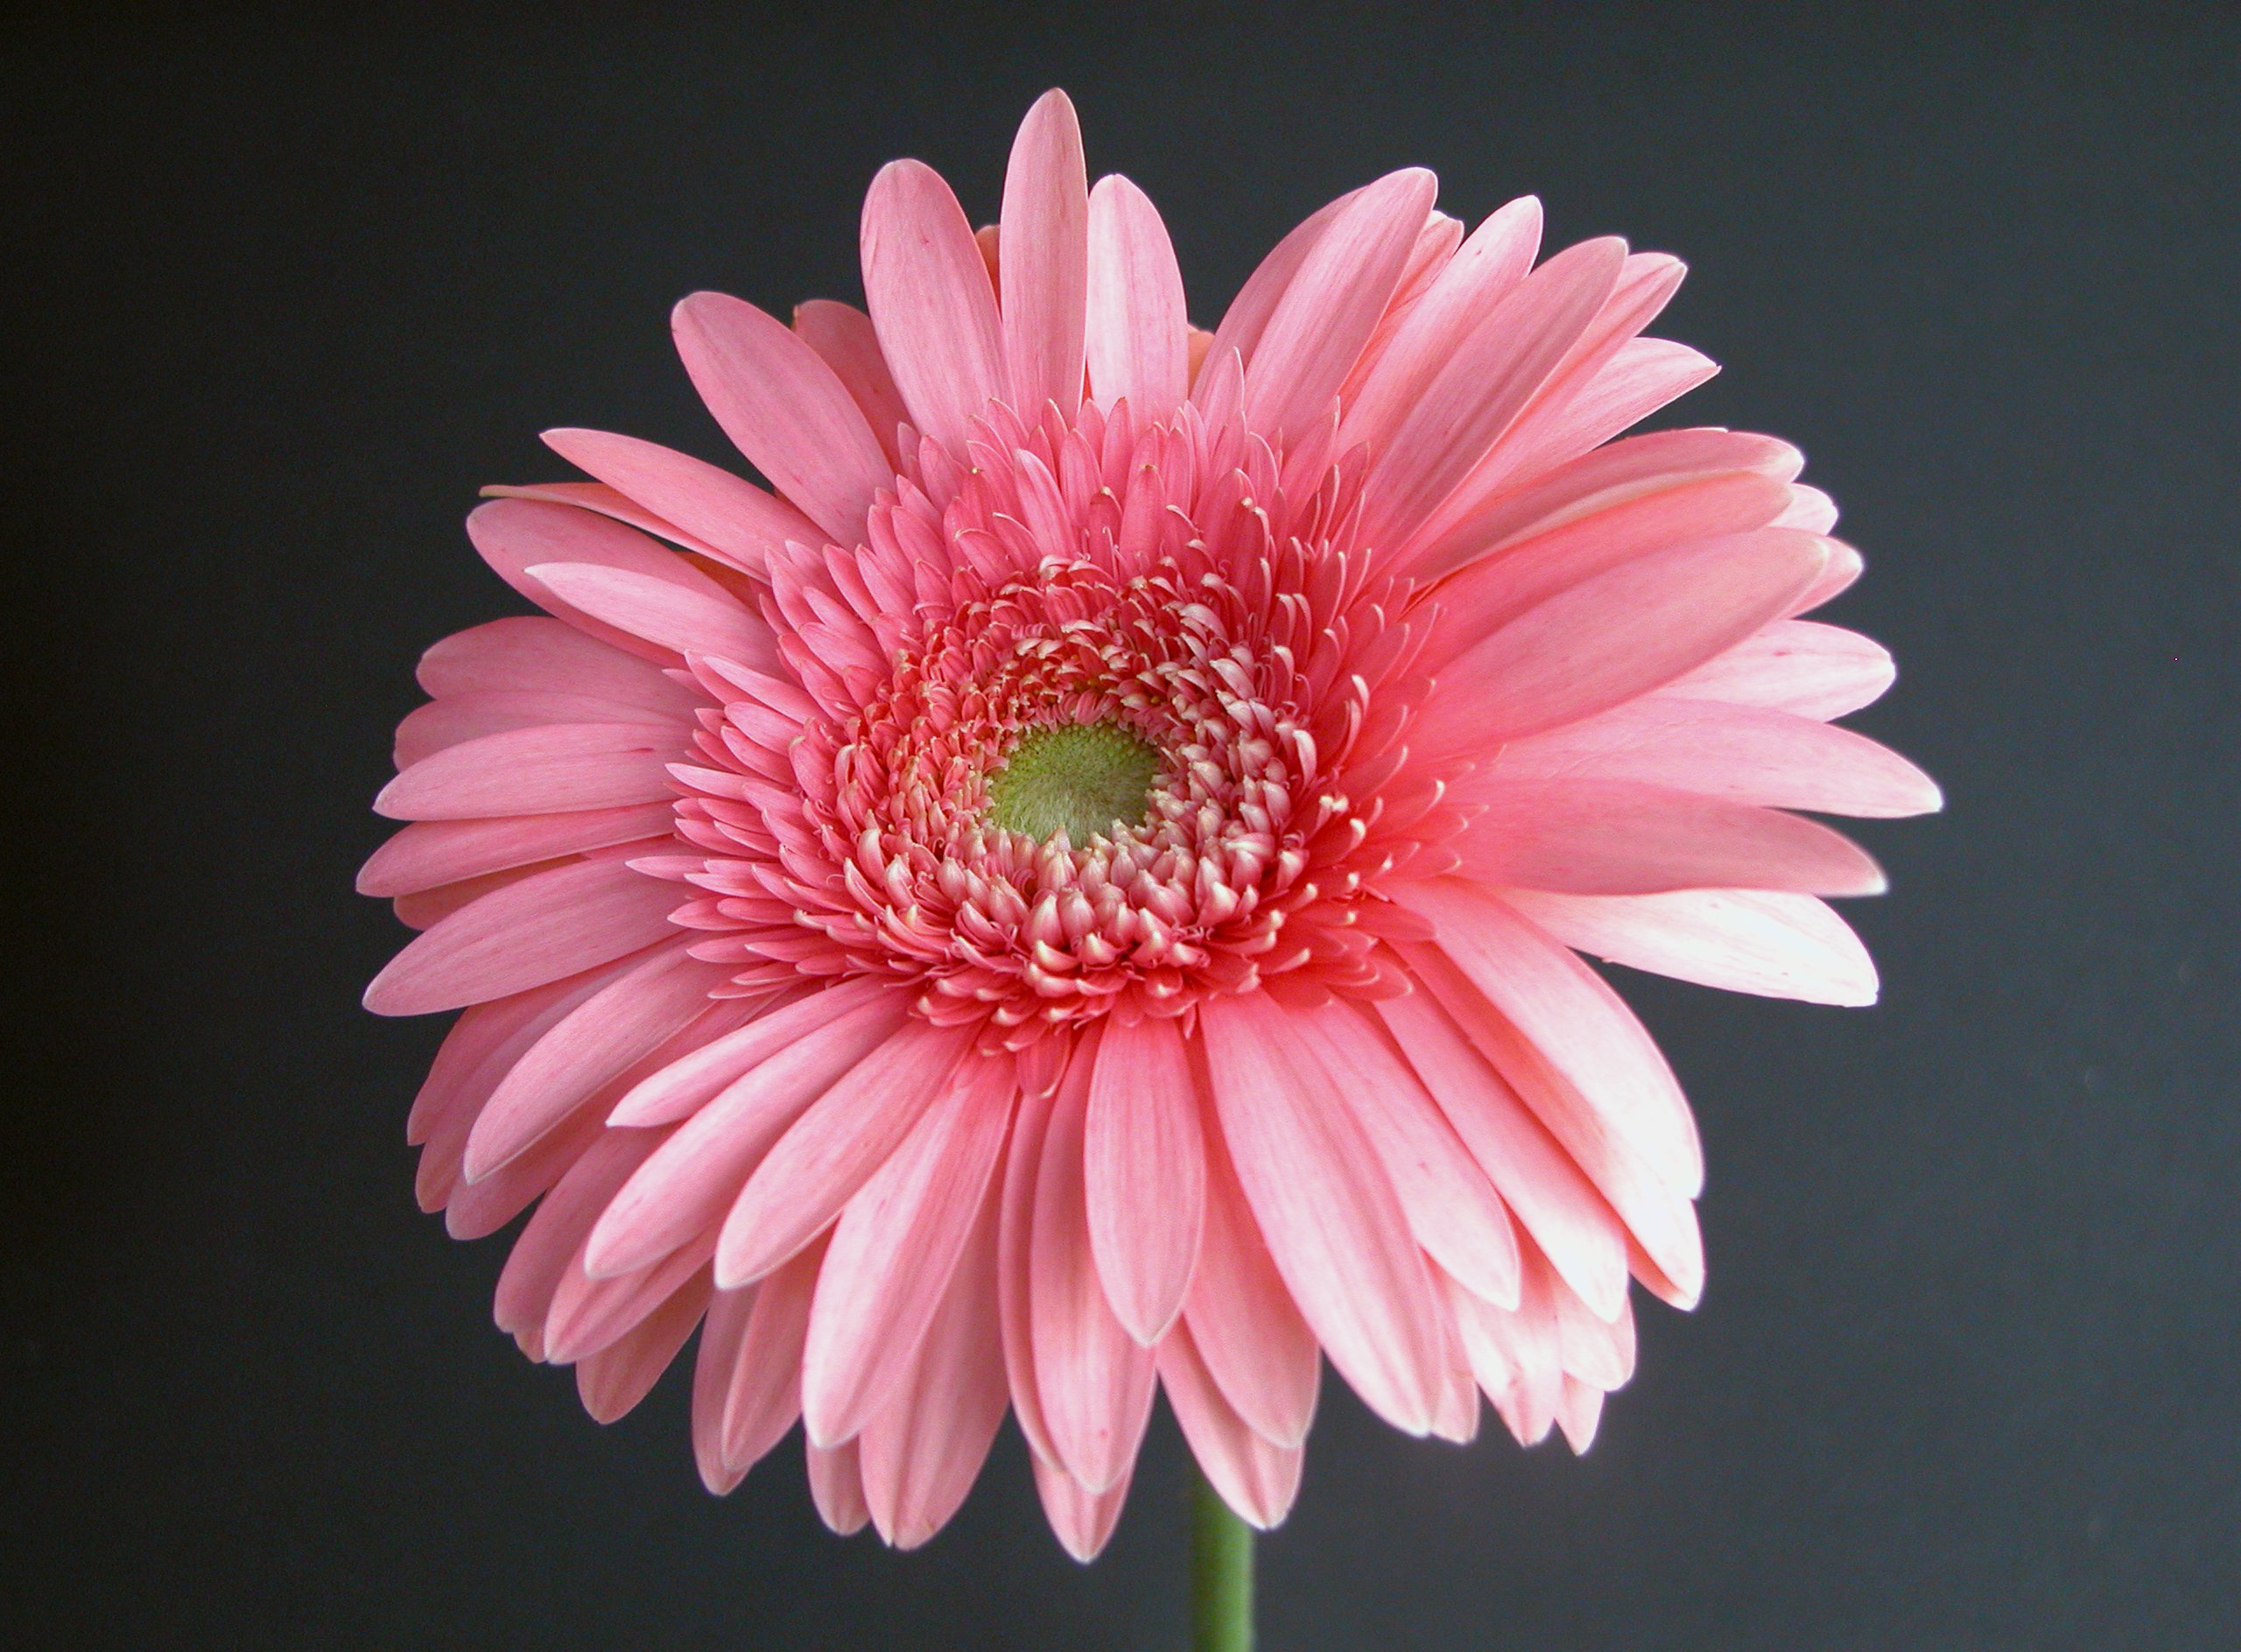 The beauty of Pink flowers | Art and Design